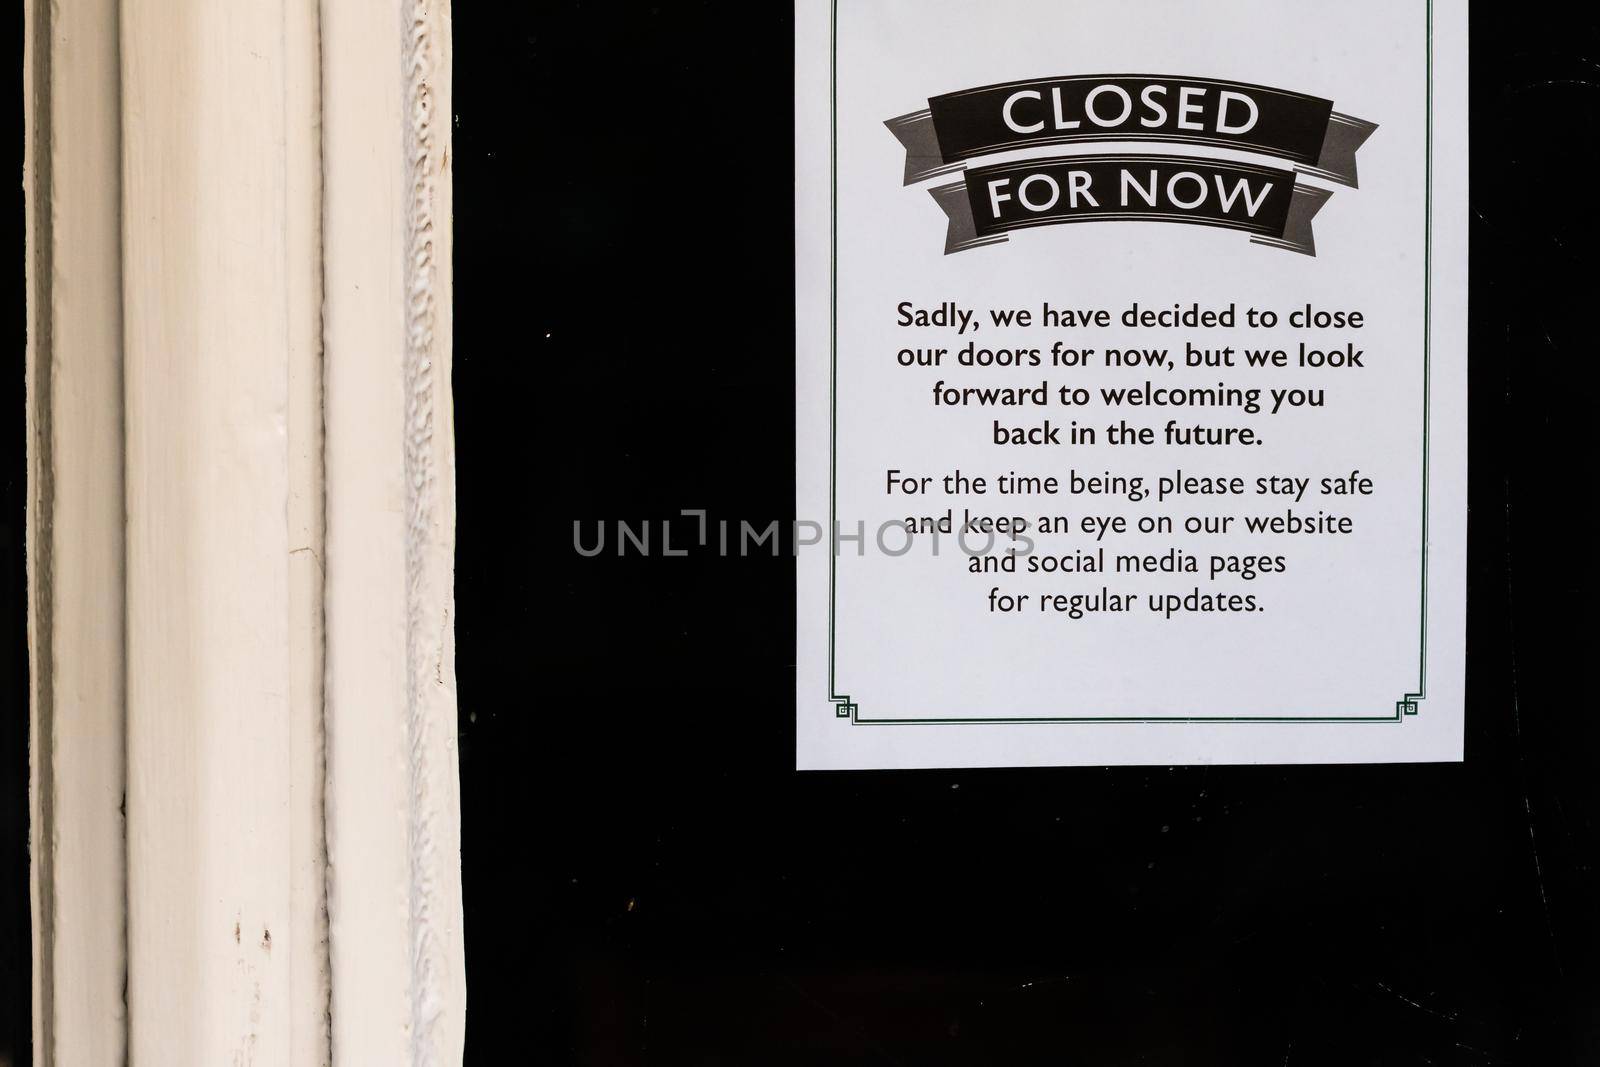 Closed for now sign on a restaurant window during covid-19 pandemic by mauricallari